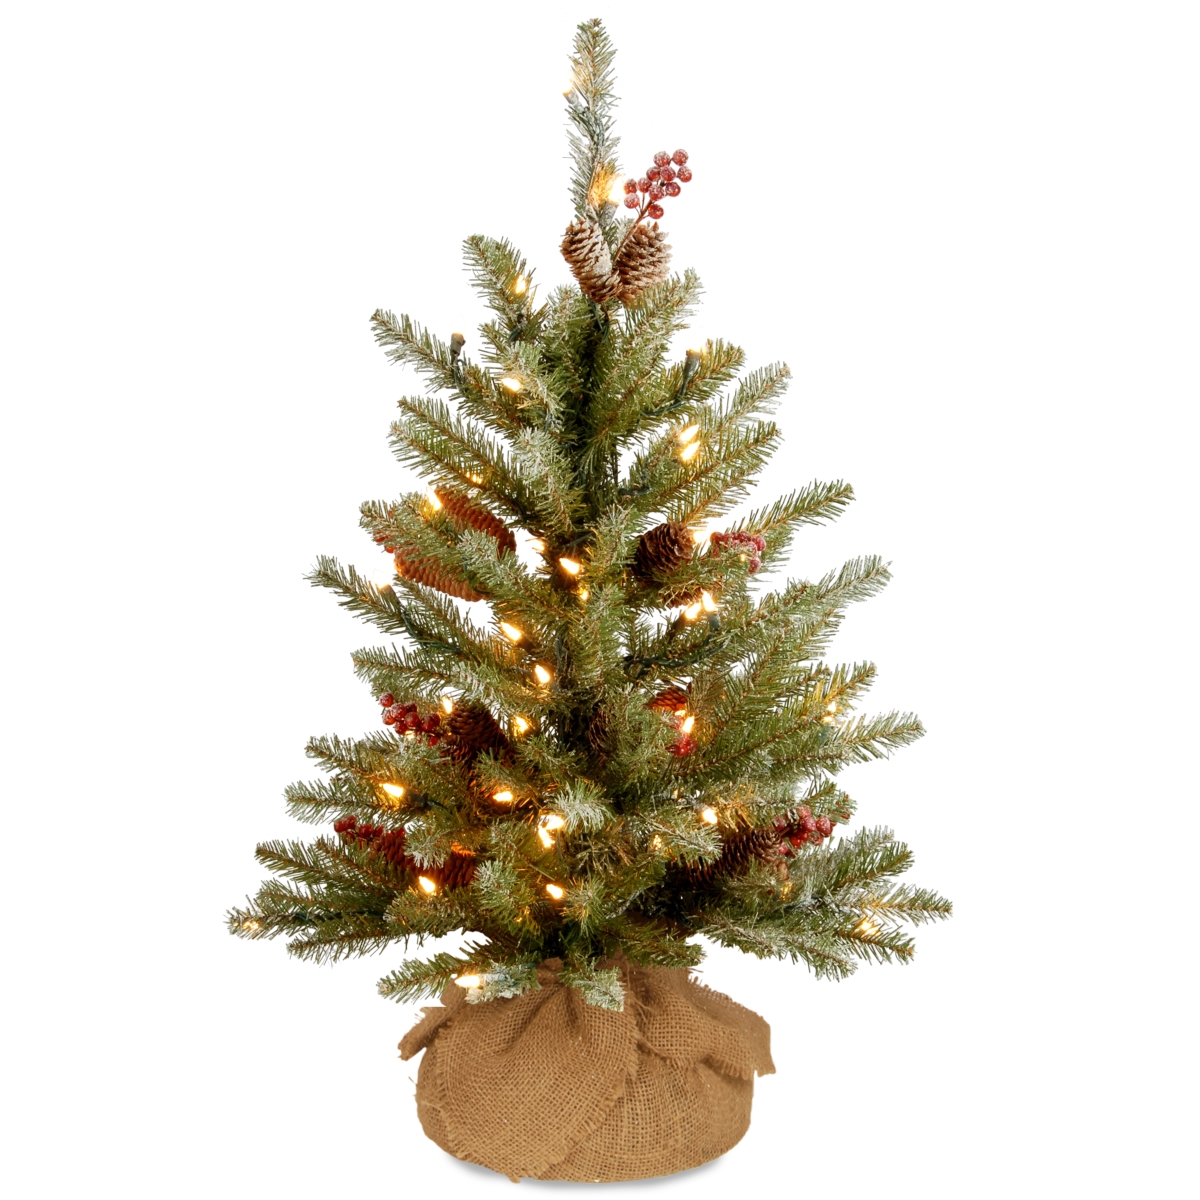 3 Ft. Dunhill Fir Small Tree With Red Berries, Snow, Cones & Battery Operated Operated Led Lights